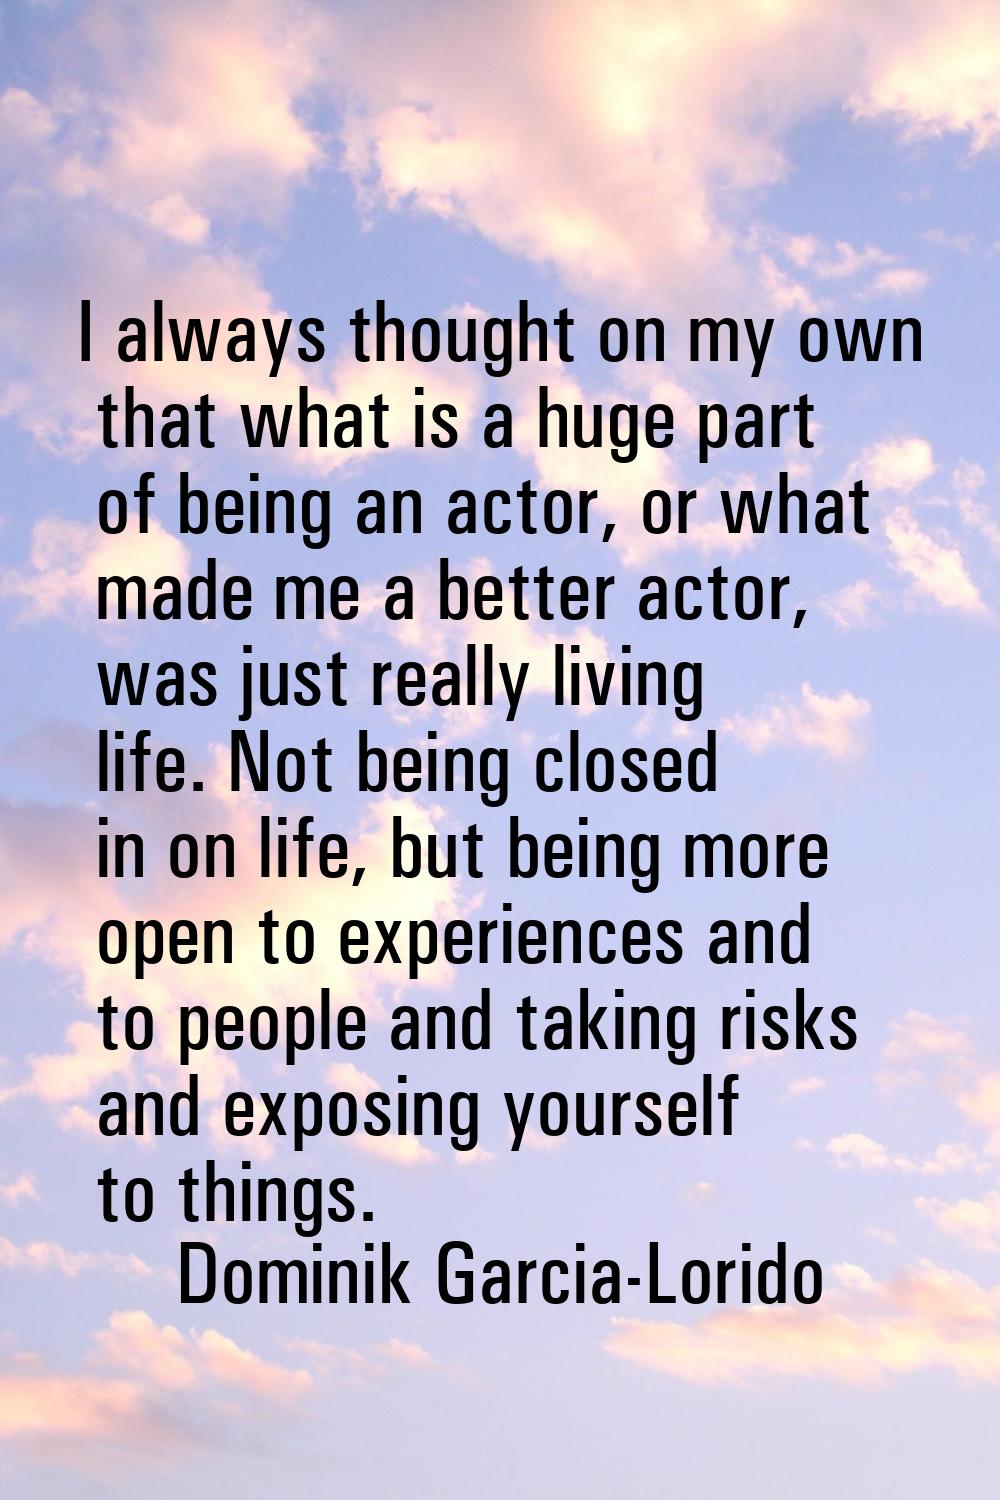 I always thought on my own that what is a huge part of being an actor, or what made me a better act